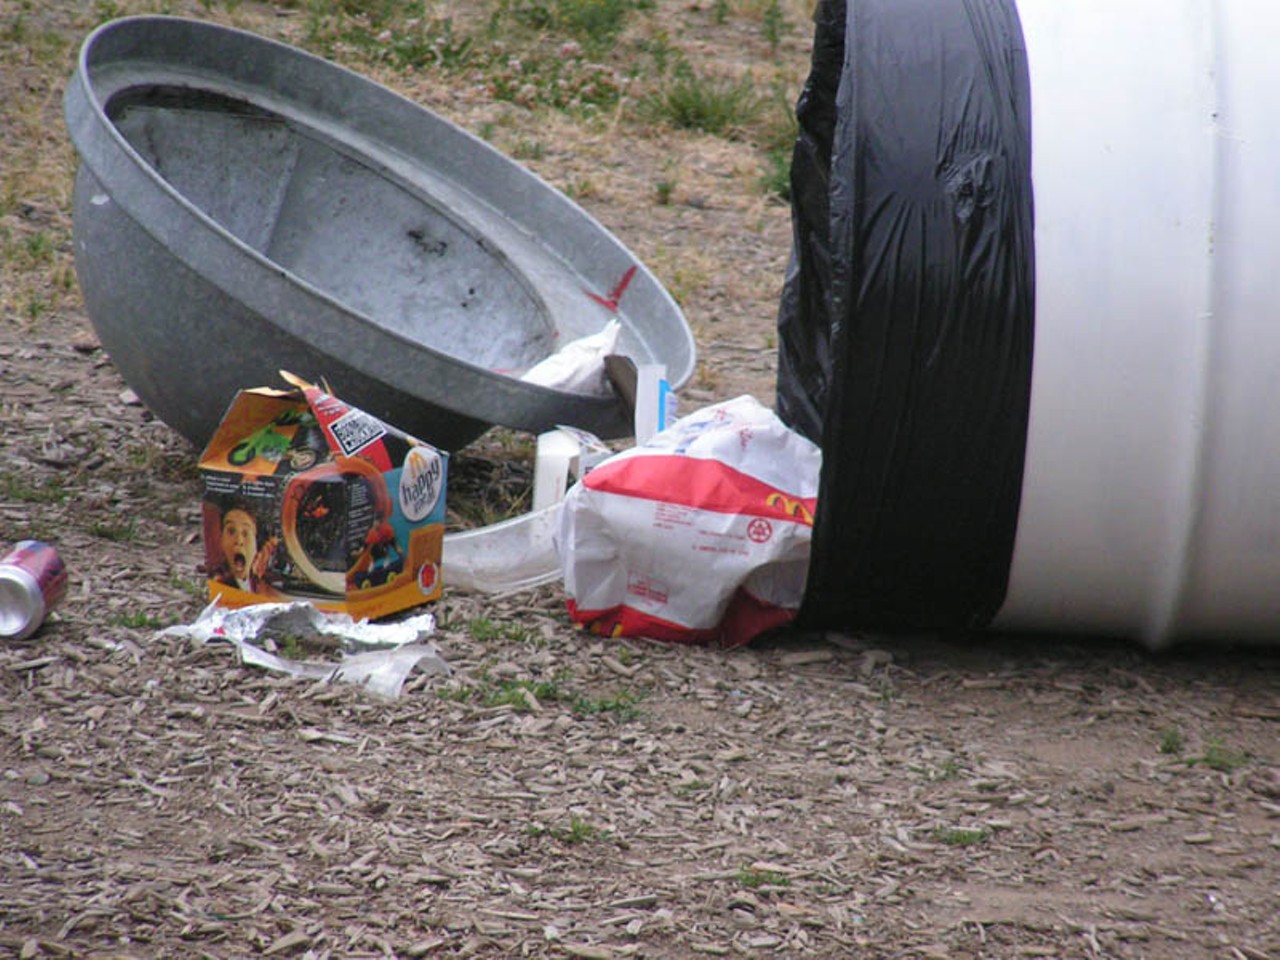 Be courteous about your neighbor’s garbage.
The next time you want to eat your neighbor’s garbage, be sure to get their permission first. If you don’t, you could serve jail time.
Photo via Flickr / Tony Swartz